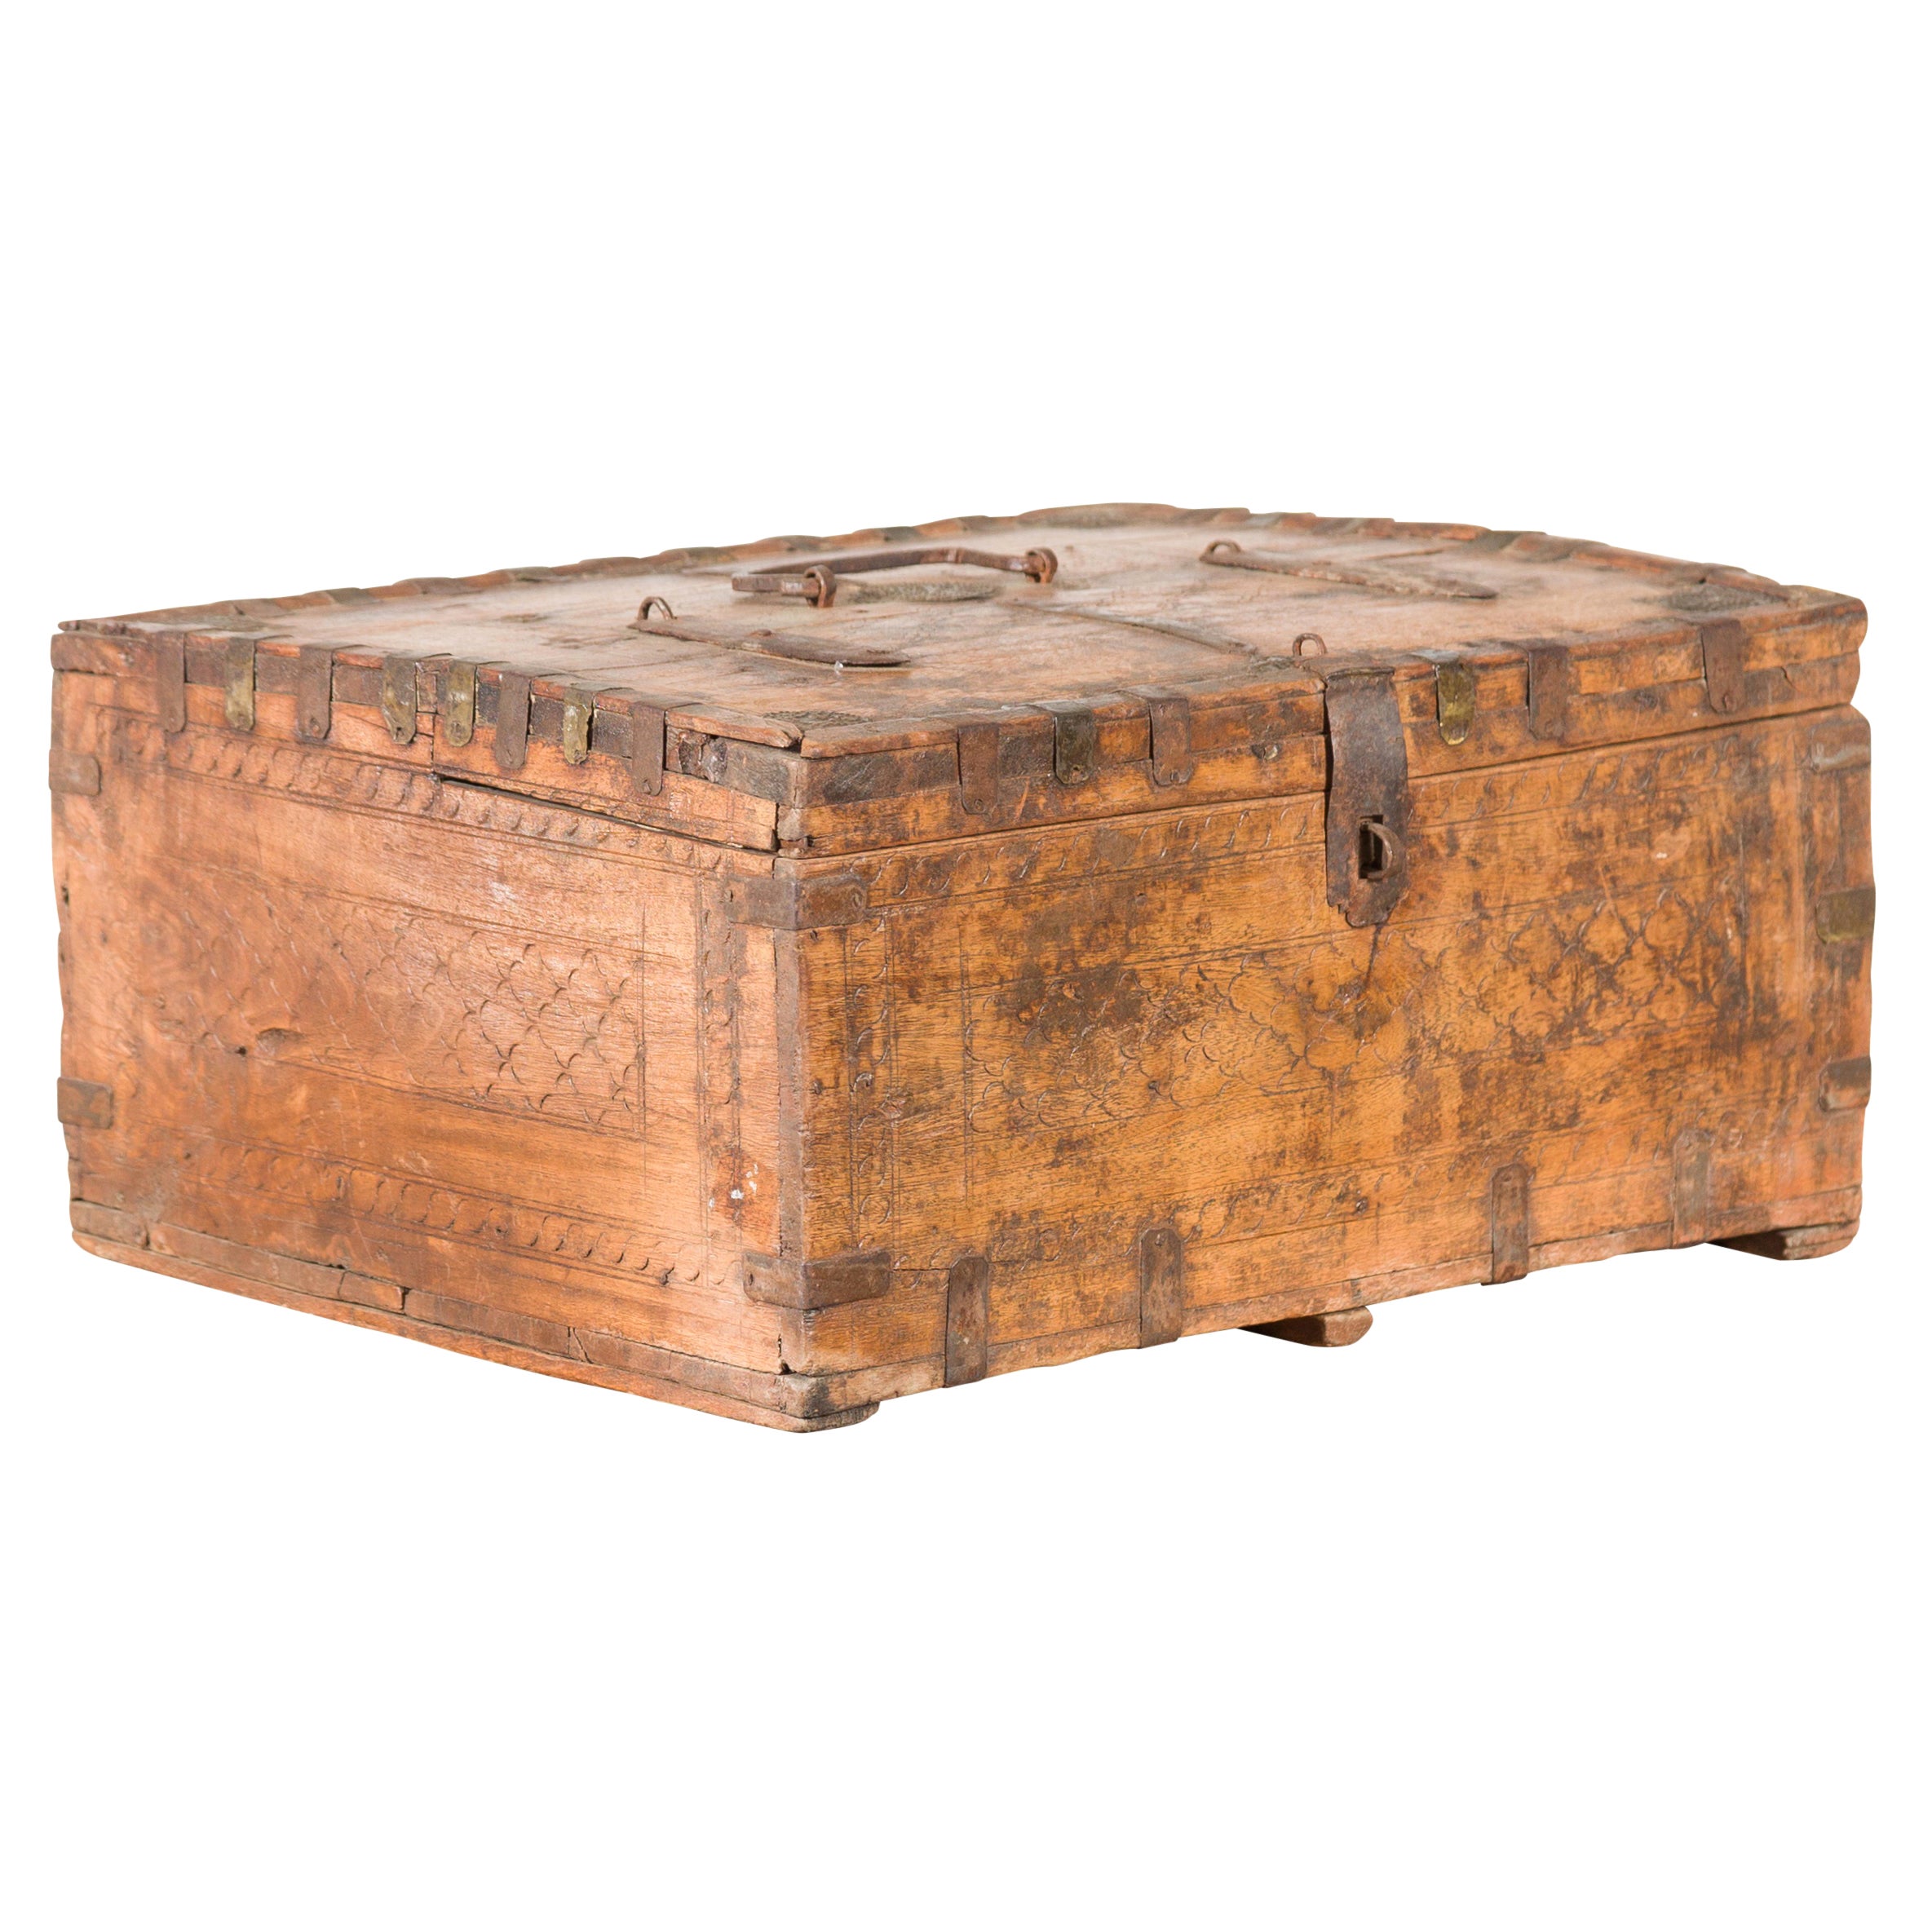 Rustic Indian 19th Century Compartmented Box with Iron Details and Carved Motifs For Sale